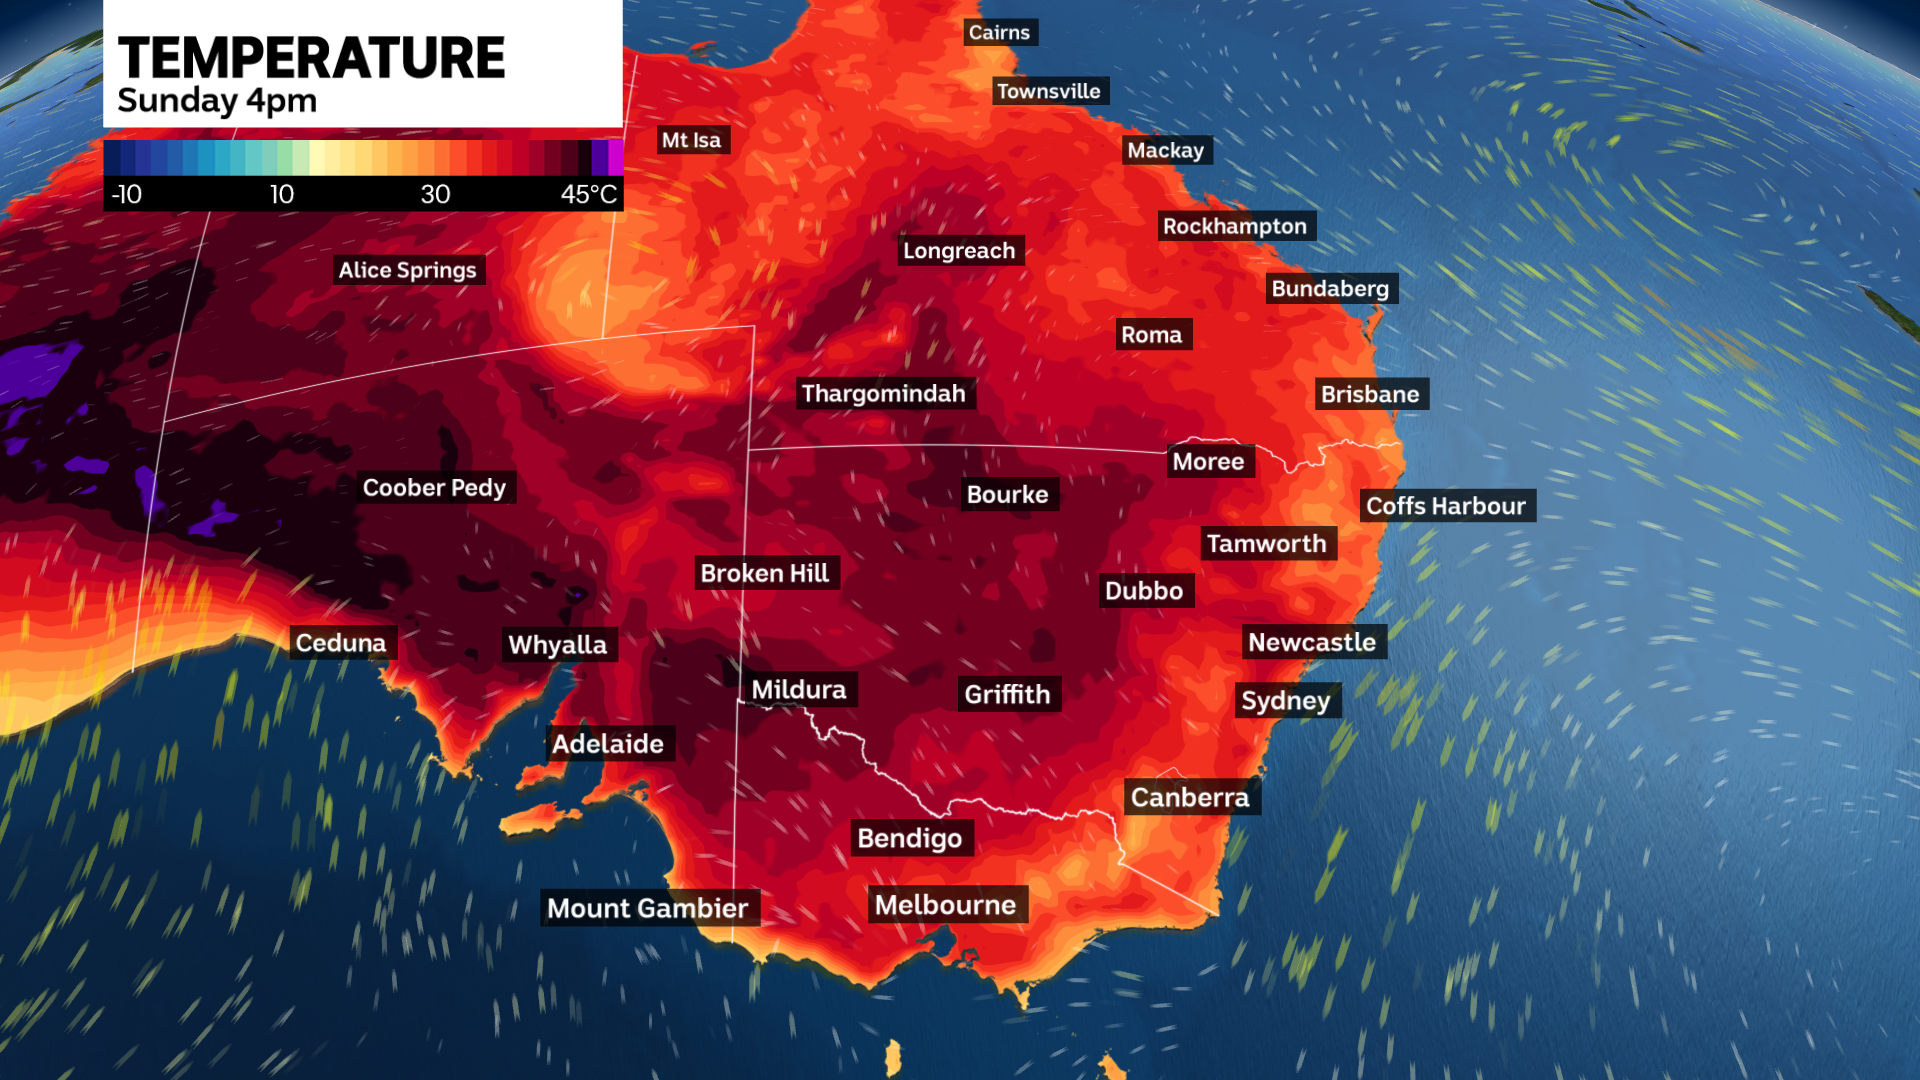 a weather map showing australian states all in the colour red due to predicted heatwave conditions